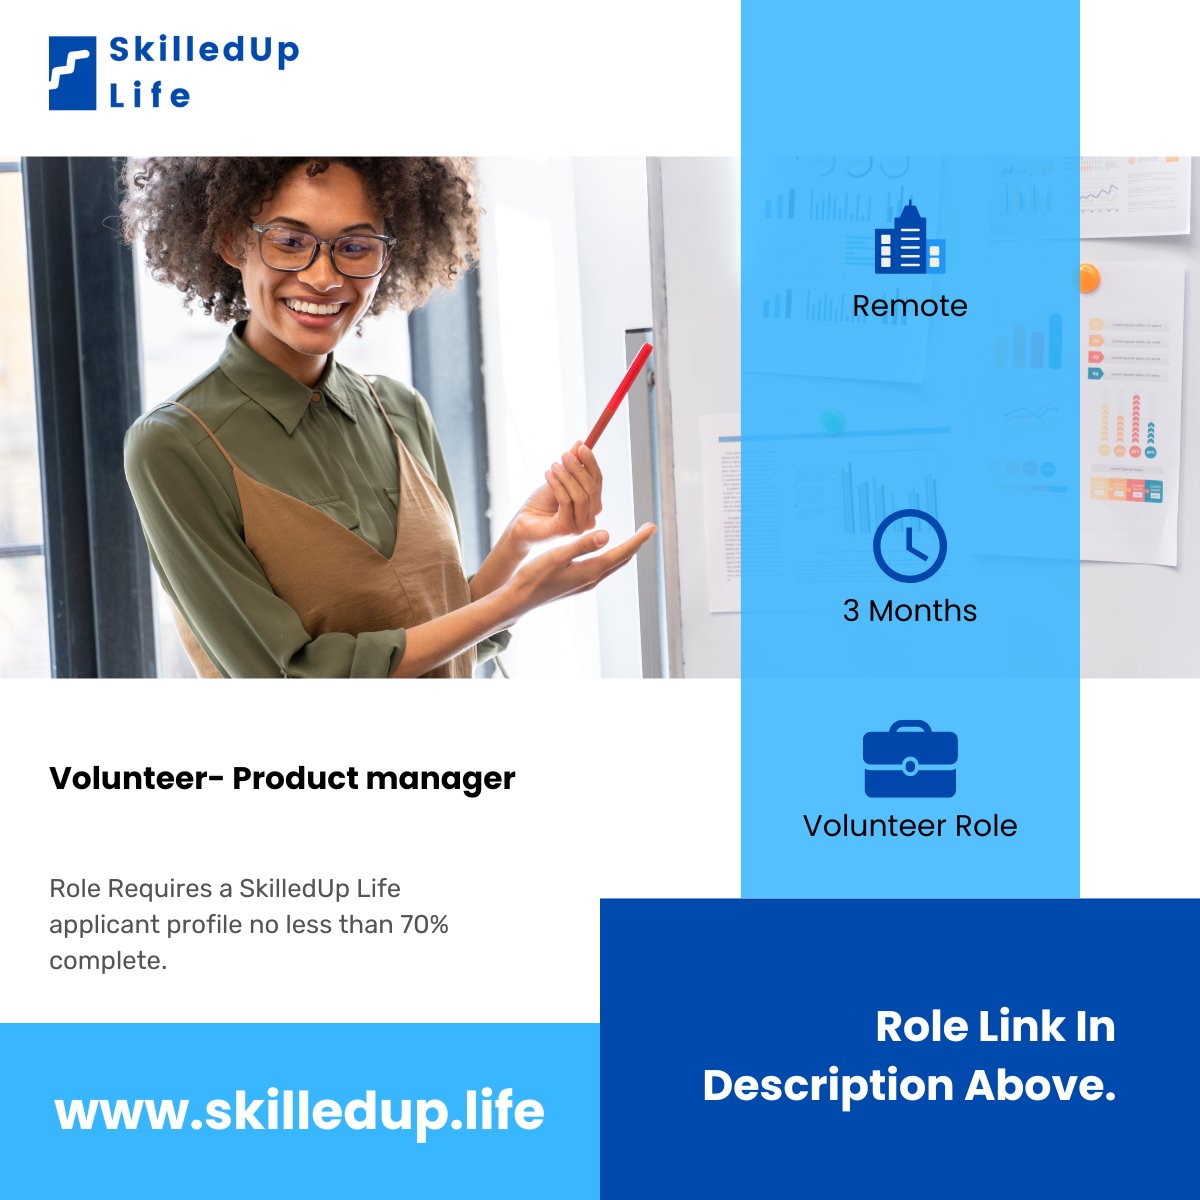 Exciting Product Manager volunteer role! Join DustID to make an impact. Help us create innovative solutions and drive positive change! Apply now skilledup.life/opportunity/ad…

#VolunteerOpportunity
#ProductManagement
#SkilledUpLife